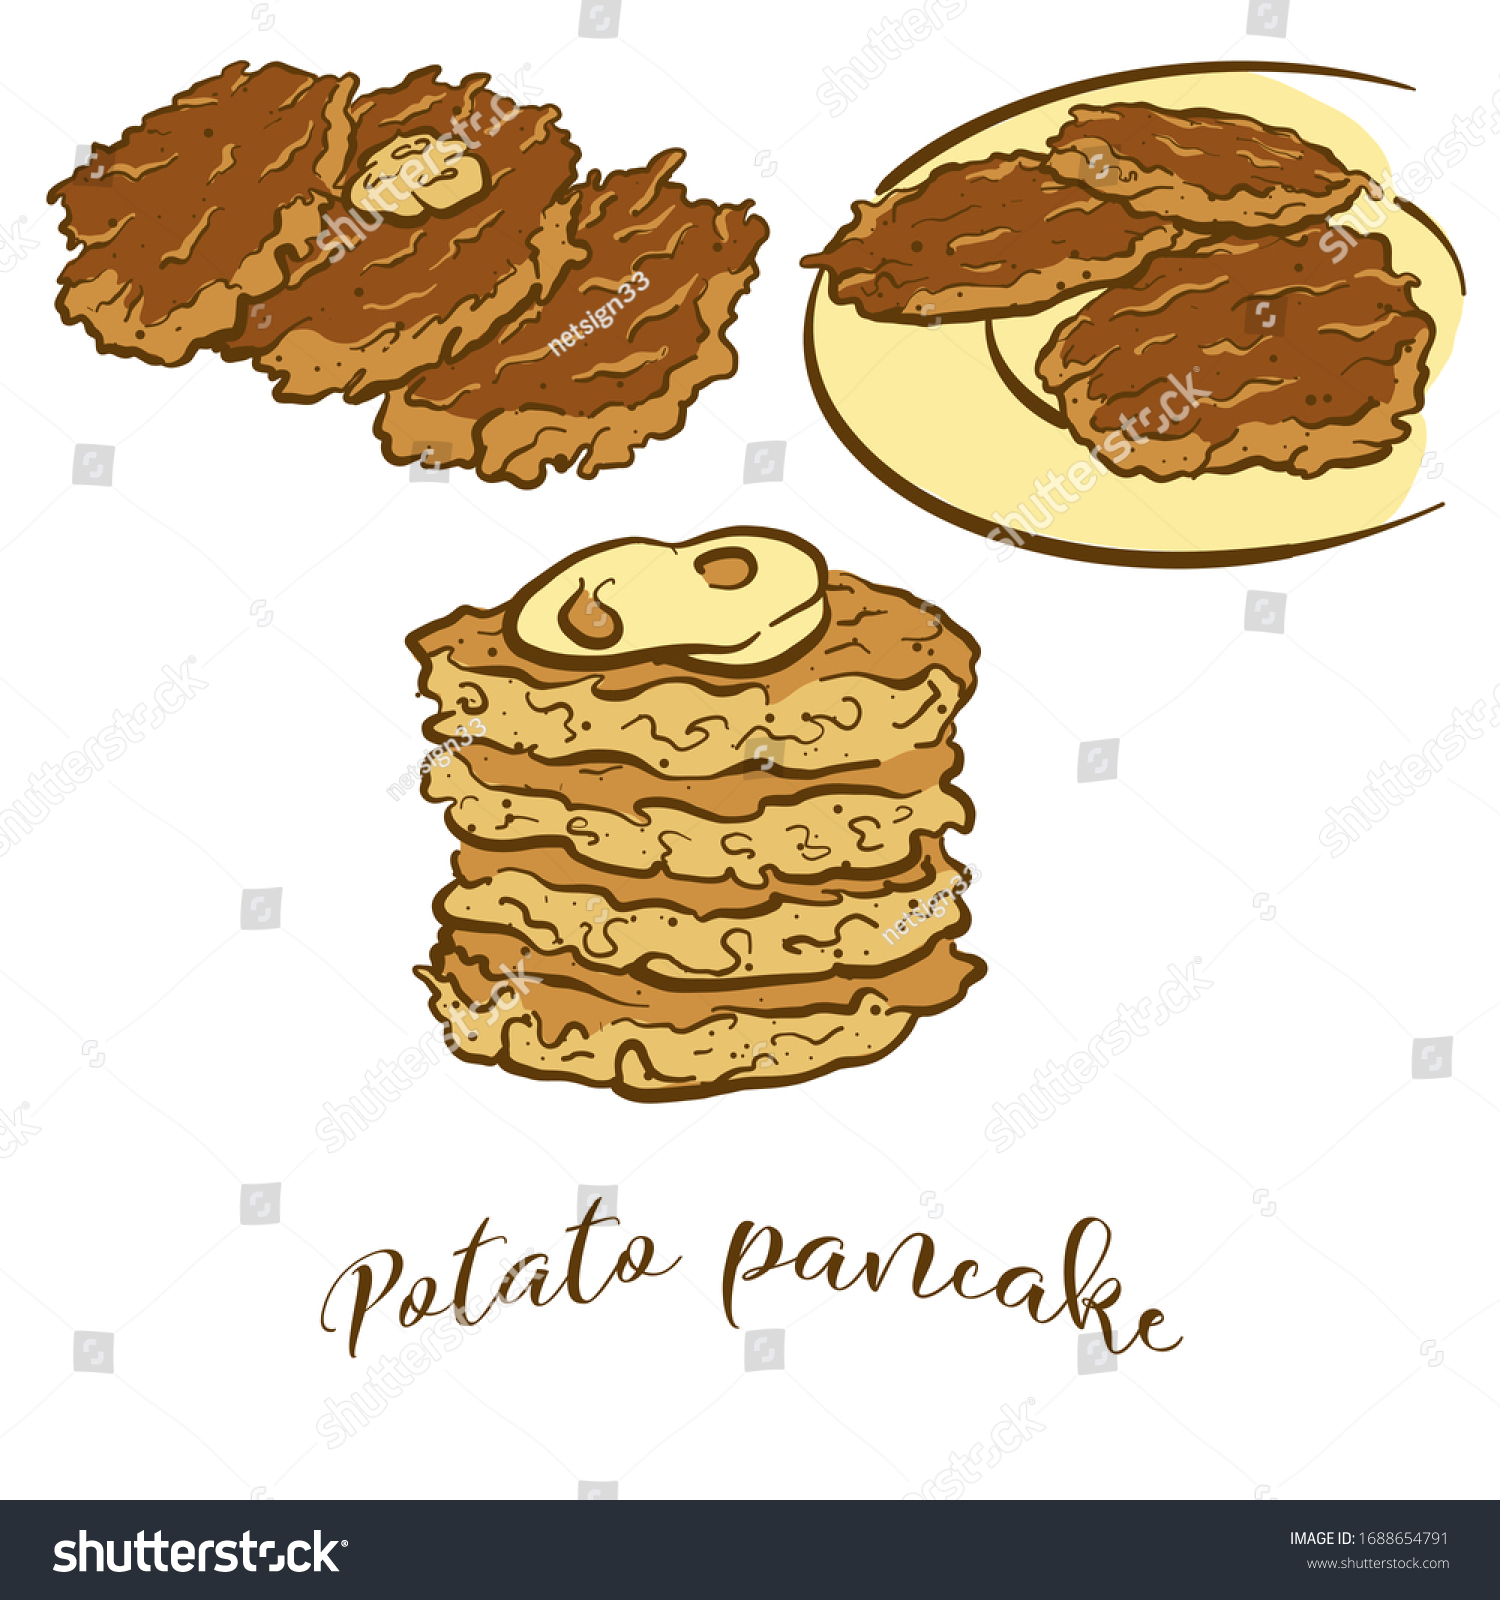 SVG of Colored drawing of Potato pancake bread. Vector illustration of Pancake food, usually known in Slovakia, Germany. Colored Bread sketches. svg